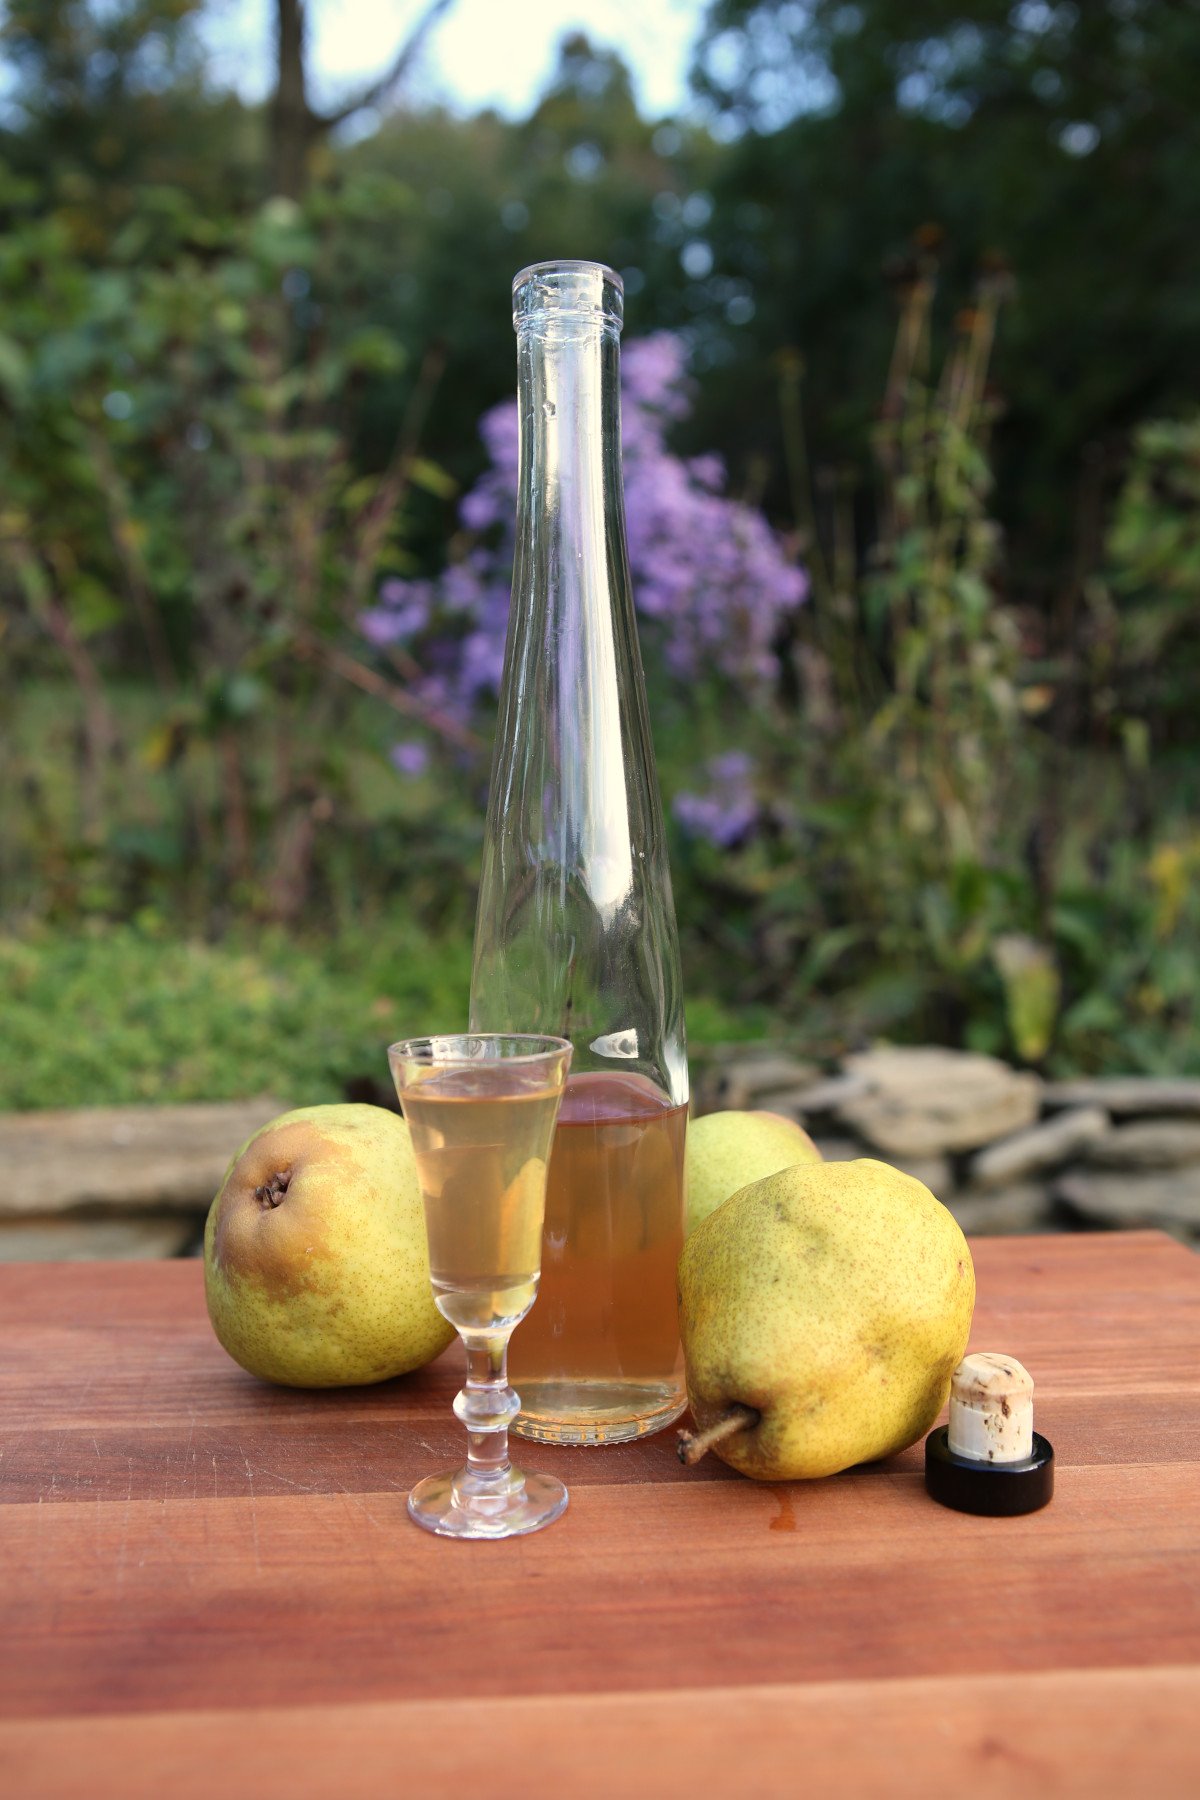 Spiced pear liqueur on a wooden cutting board with Bartlett pears in the background (vertical orientation).